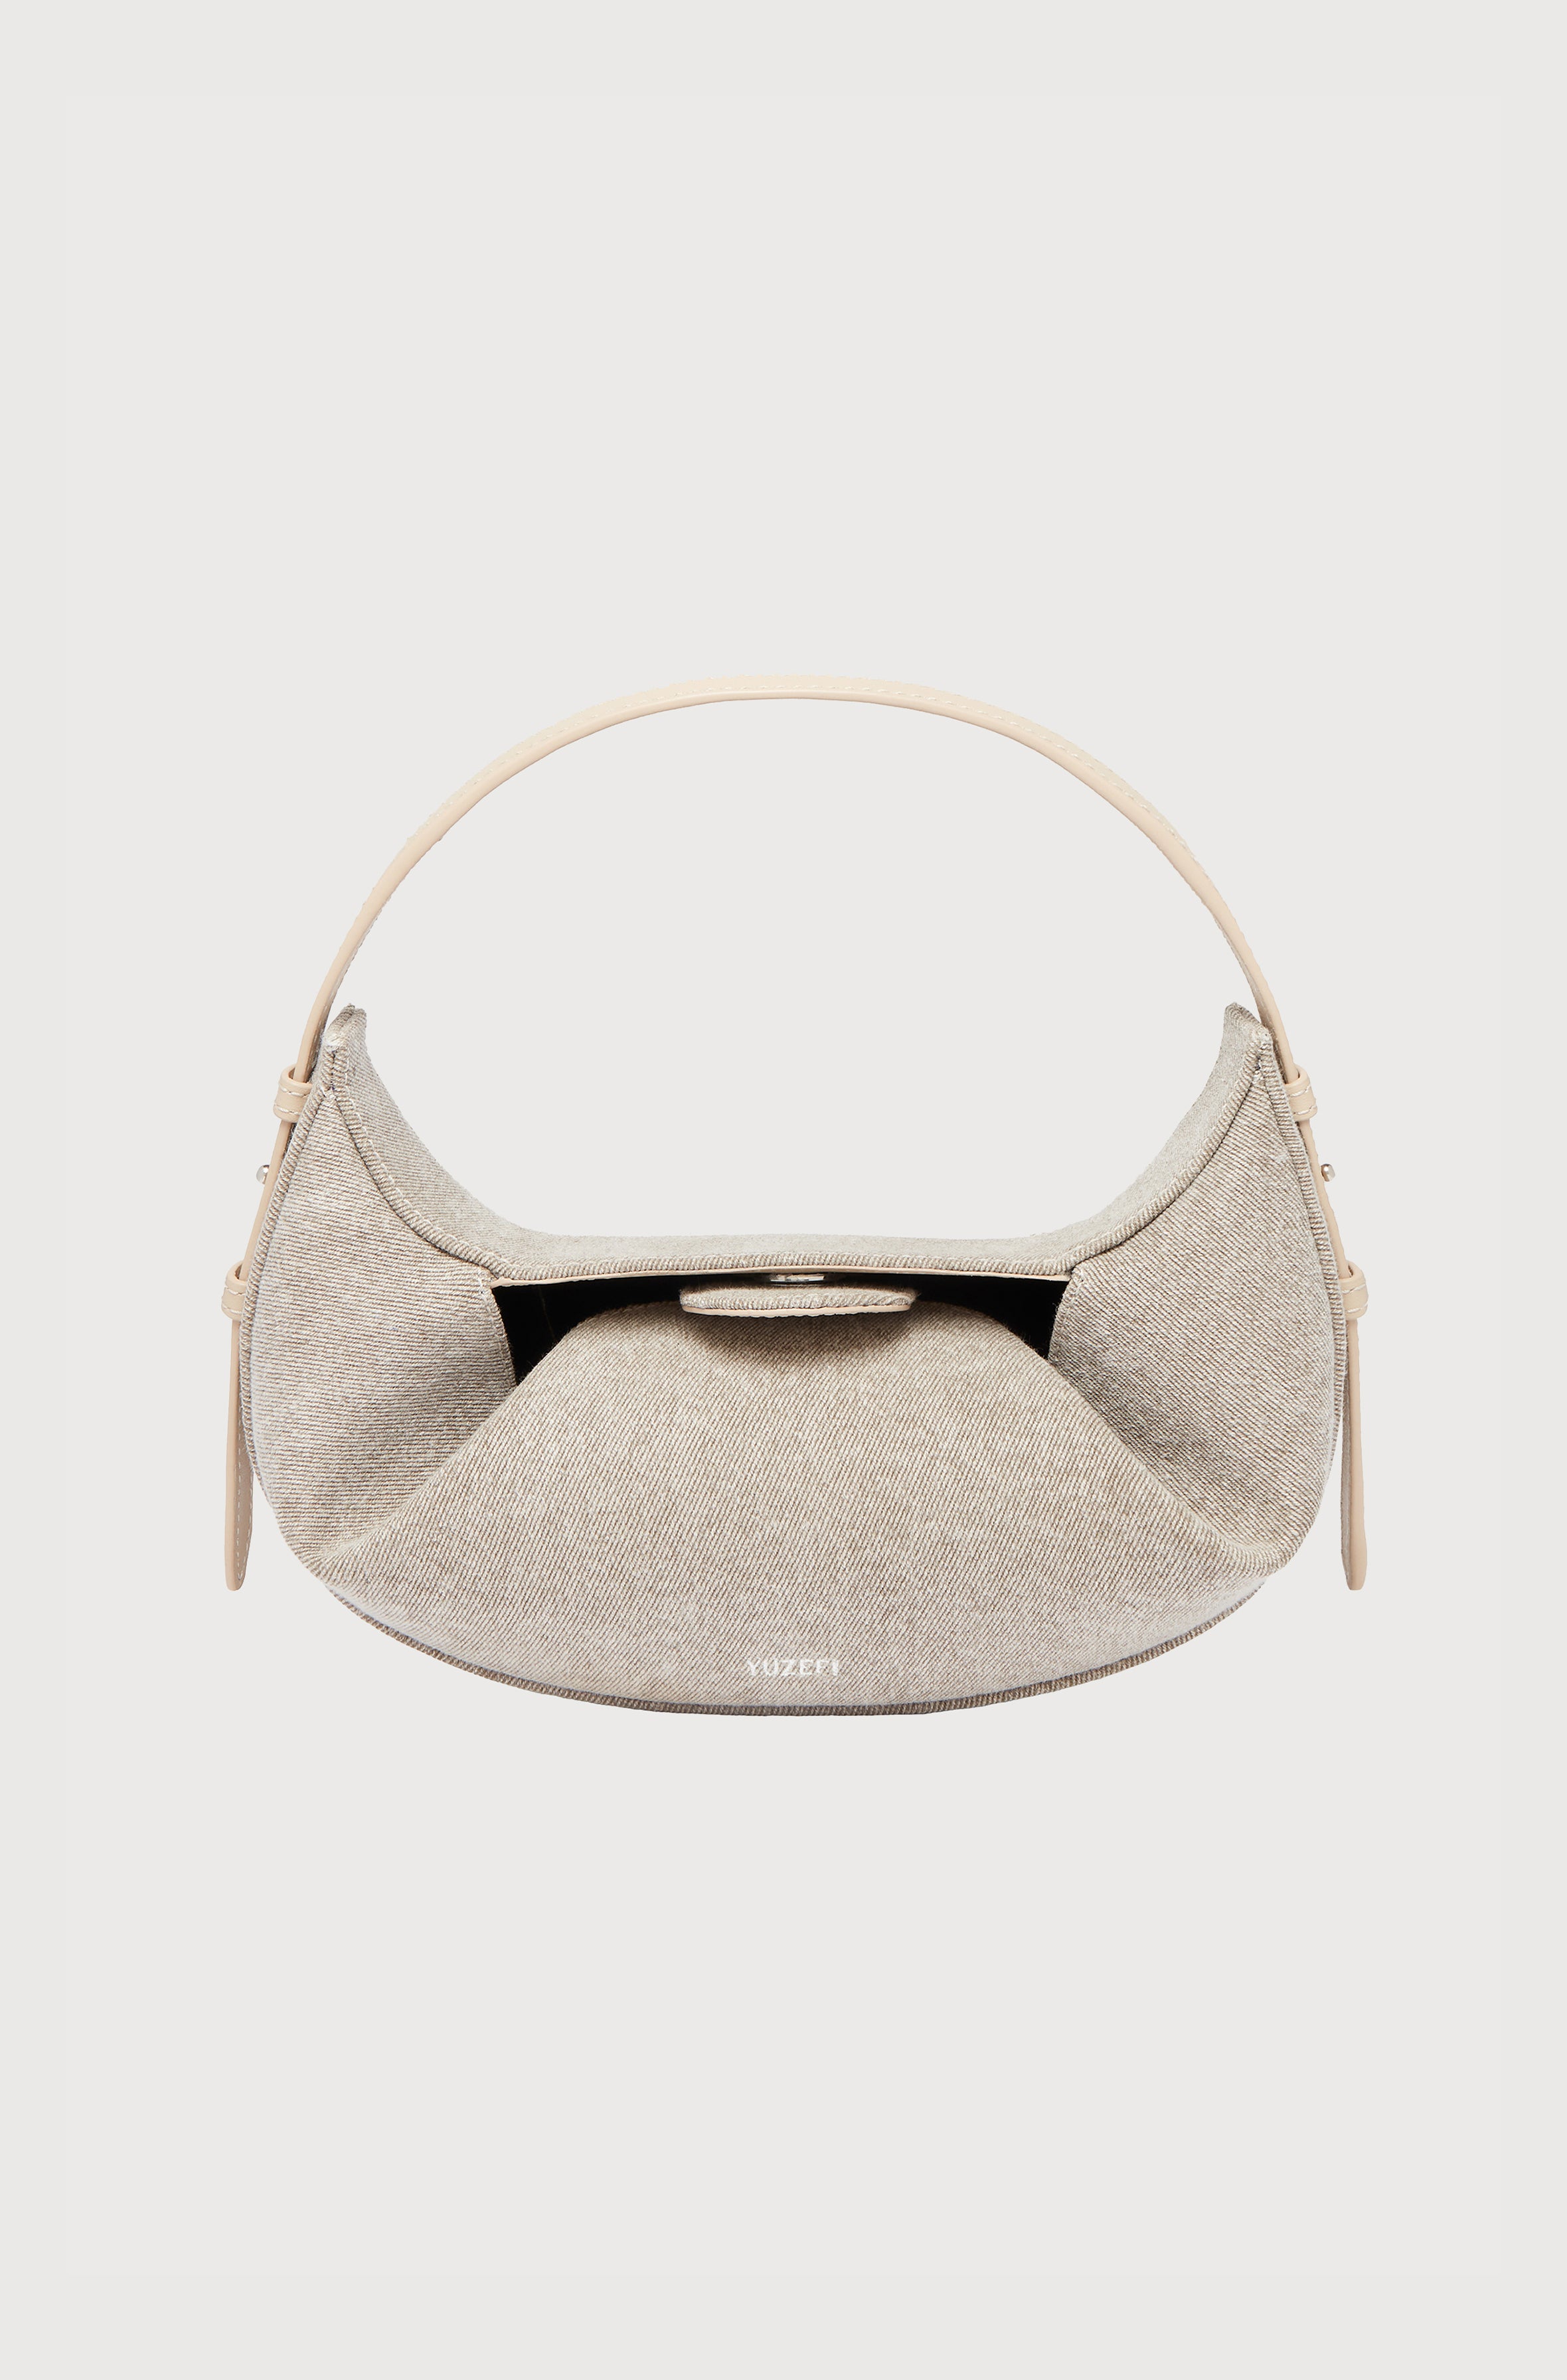 Mini Fortune Cookie Bag in Beige Leather